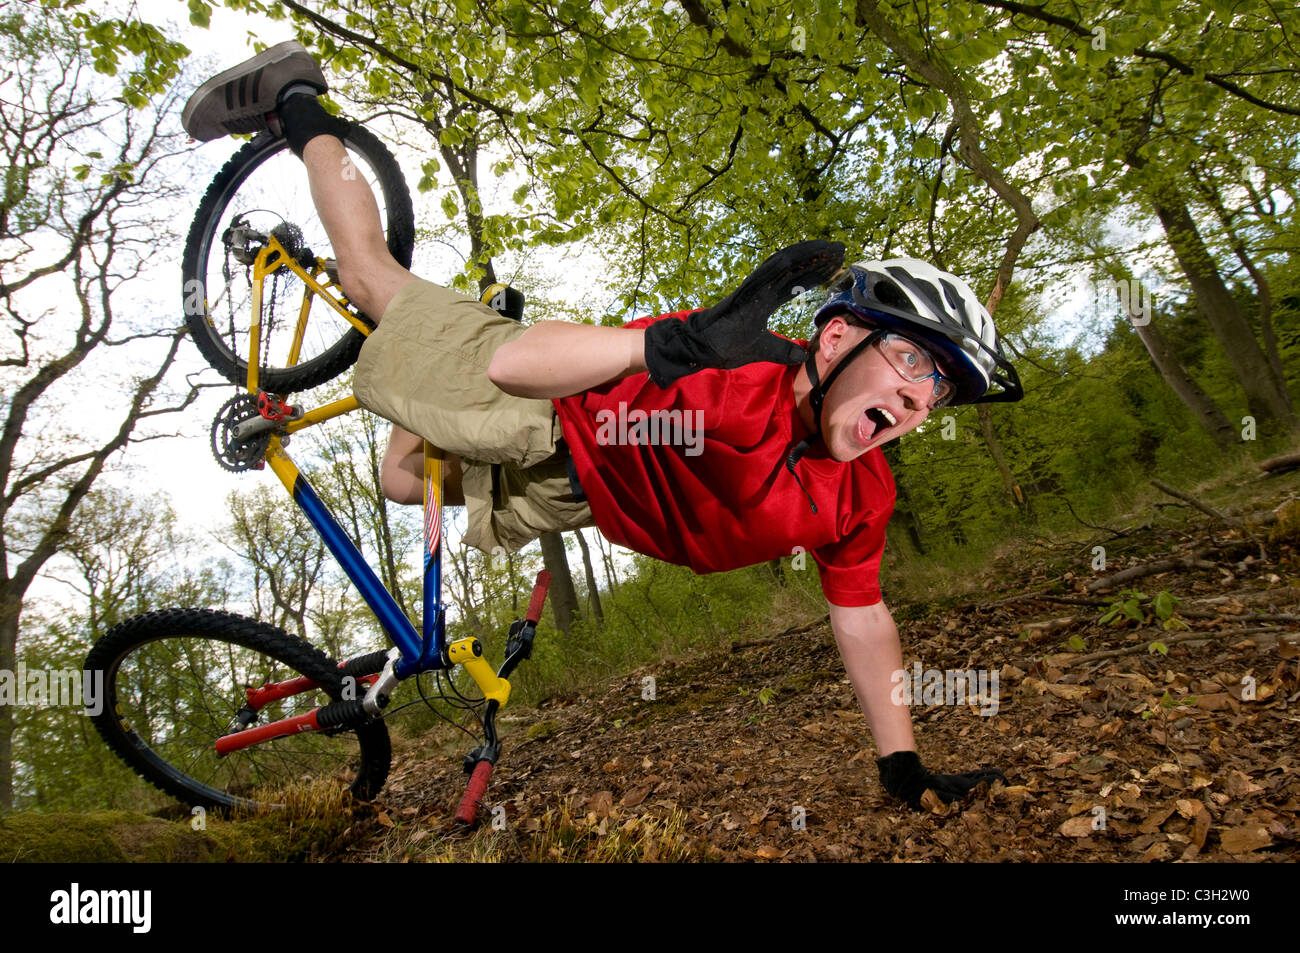 Young man falling off of bicycle dramatically Stock Photo